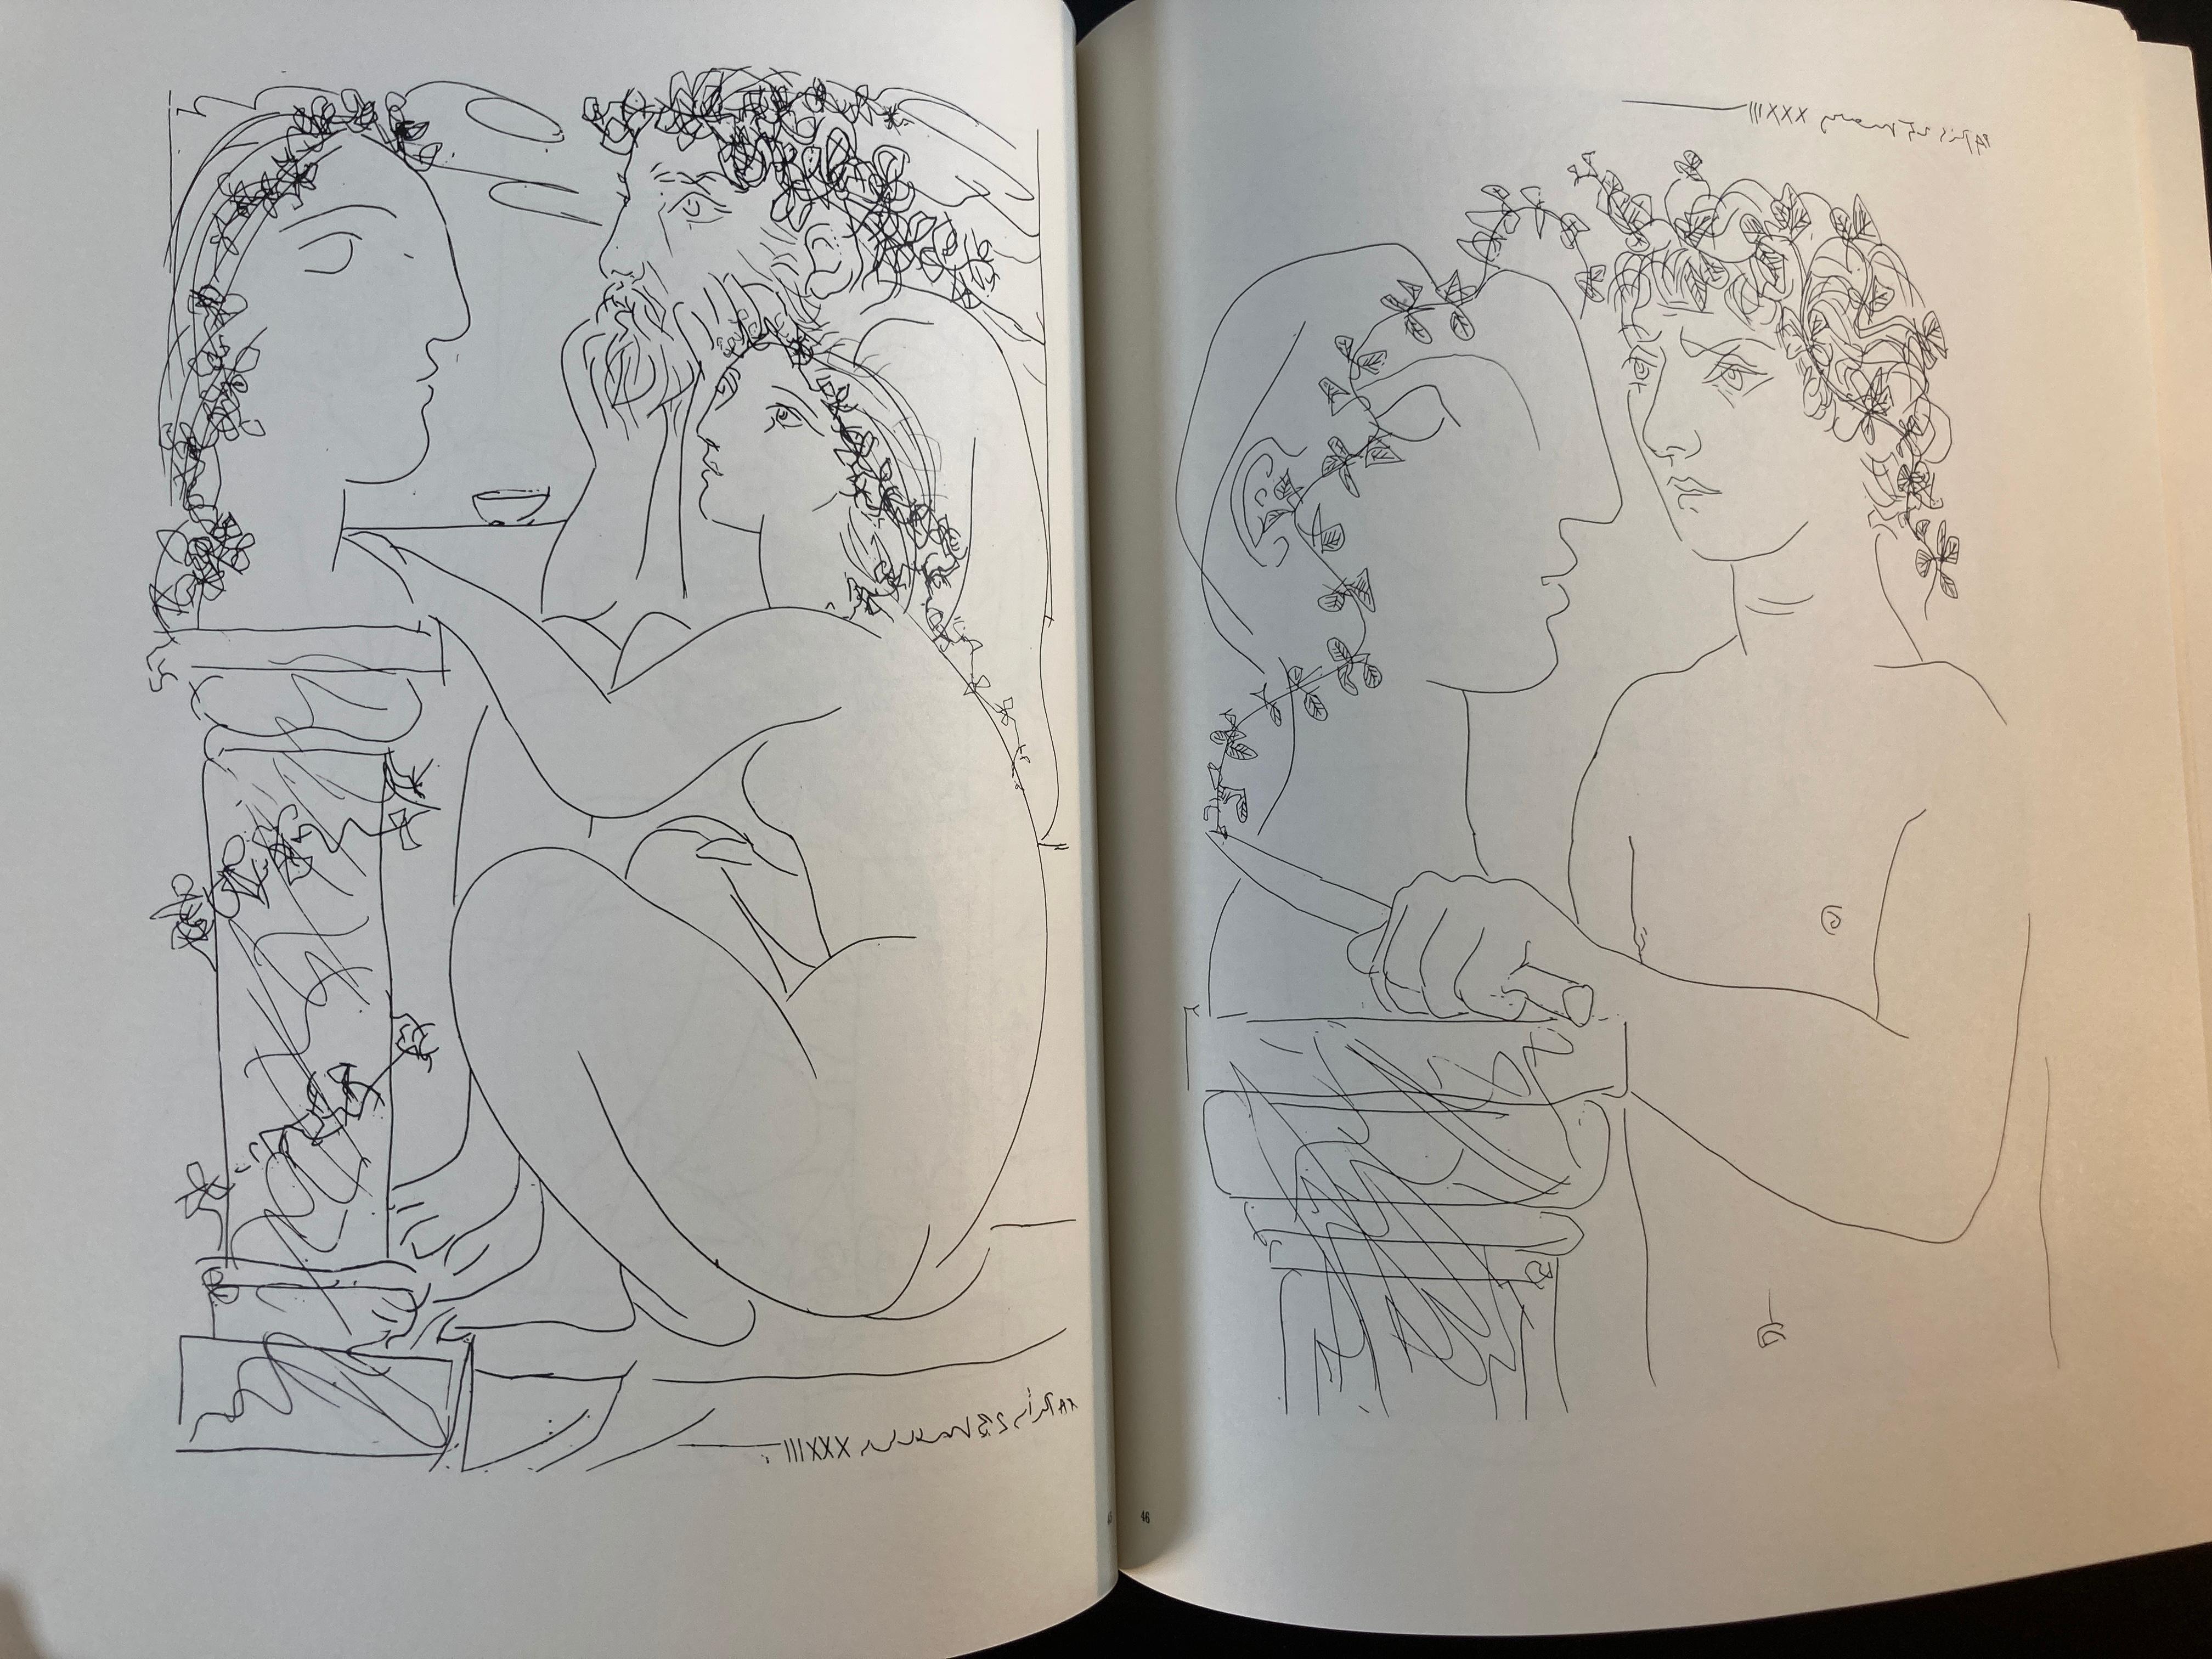 Picasso's Vollard Suite Book by Pablo Picasso In Good Condition For Sale In North Hollywood, CA